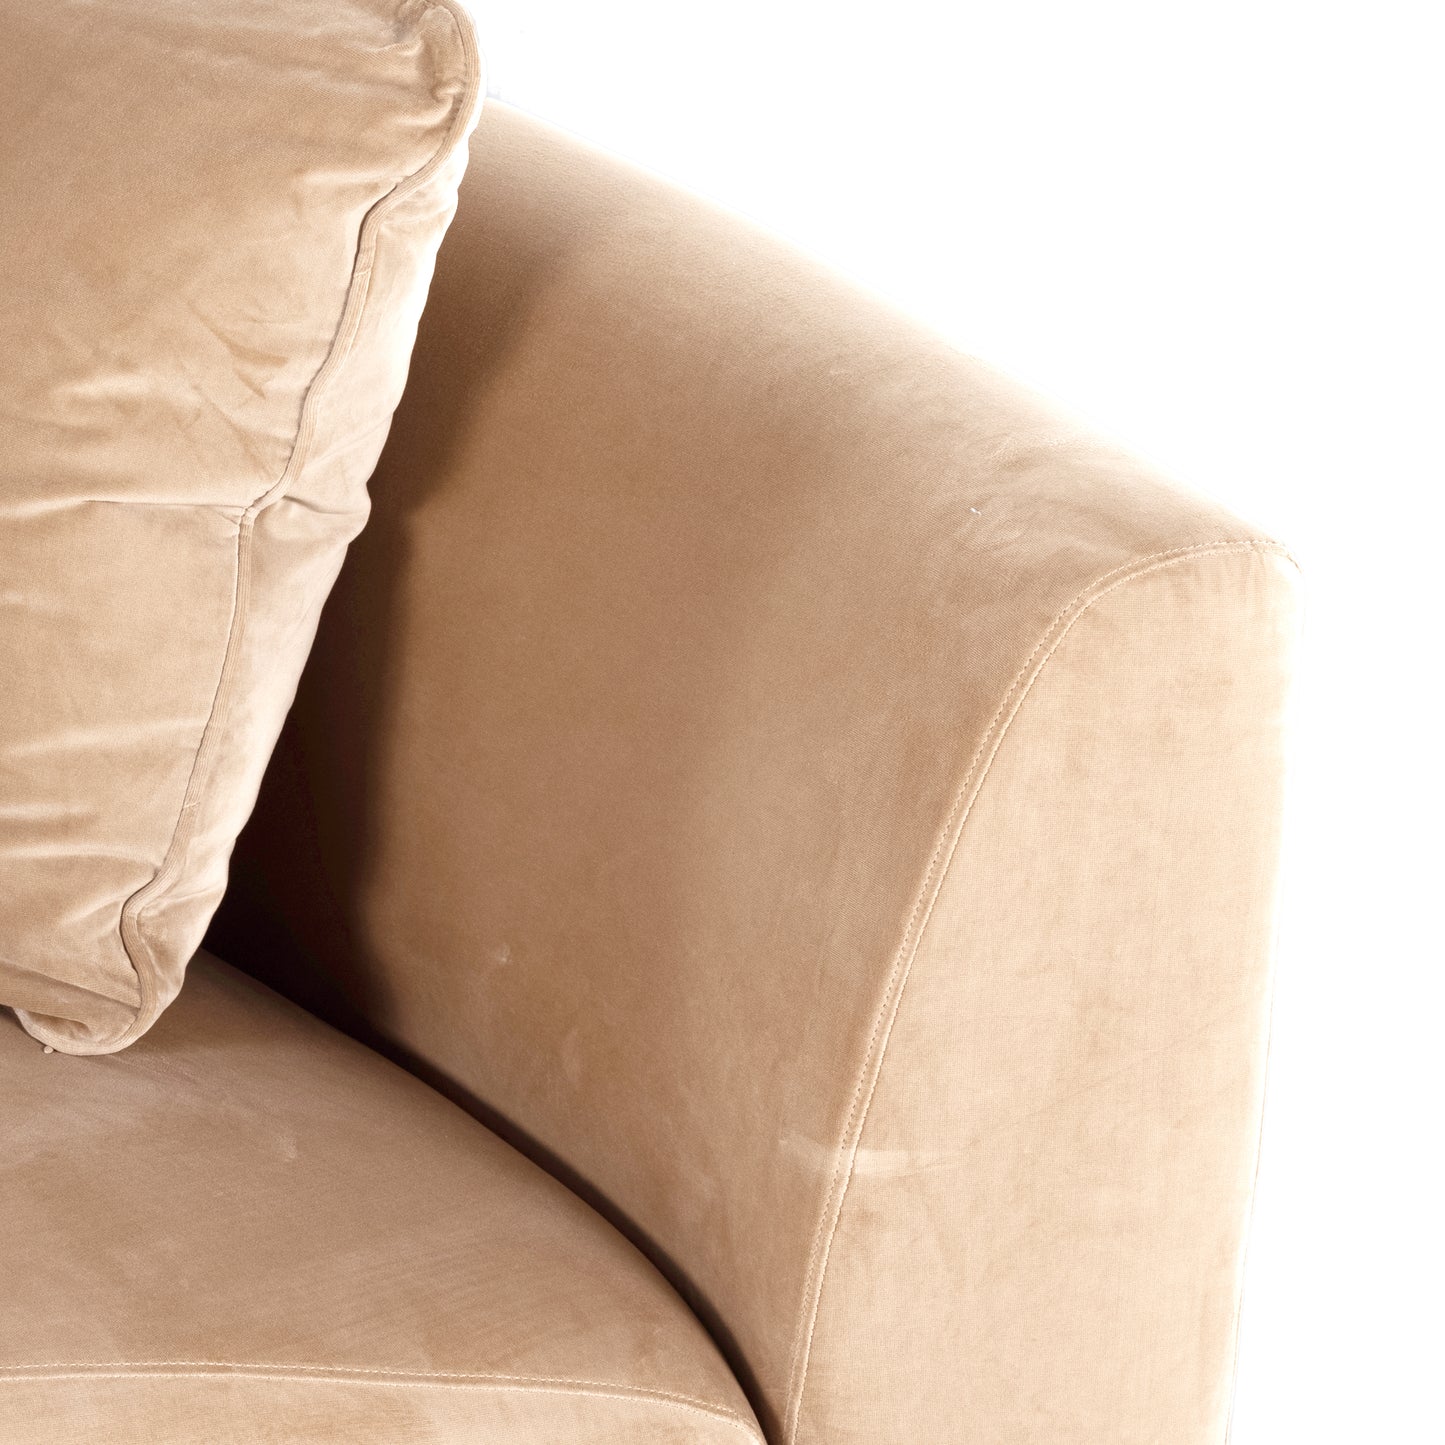 Liam Sectional | Right Arm Facing | Surrey Camel